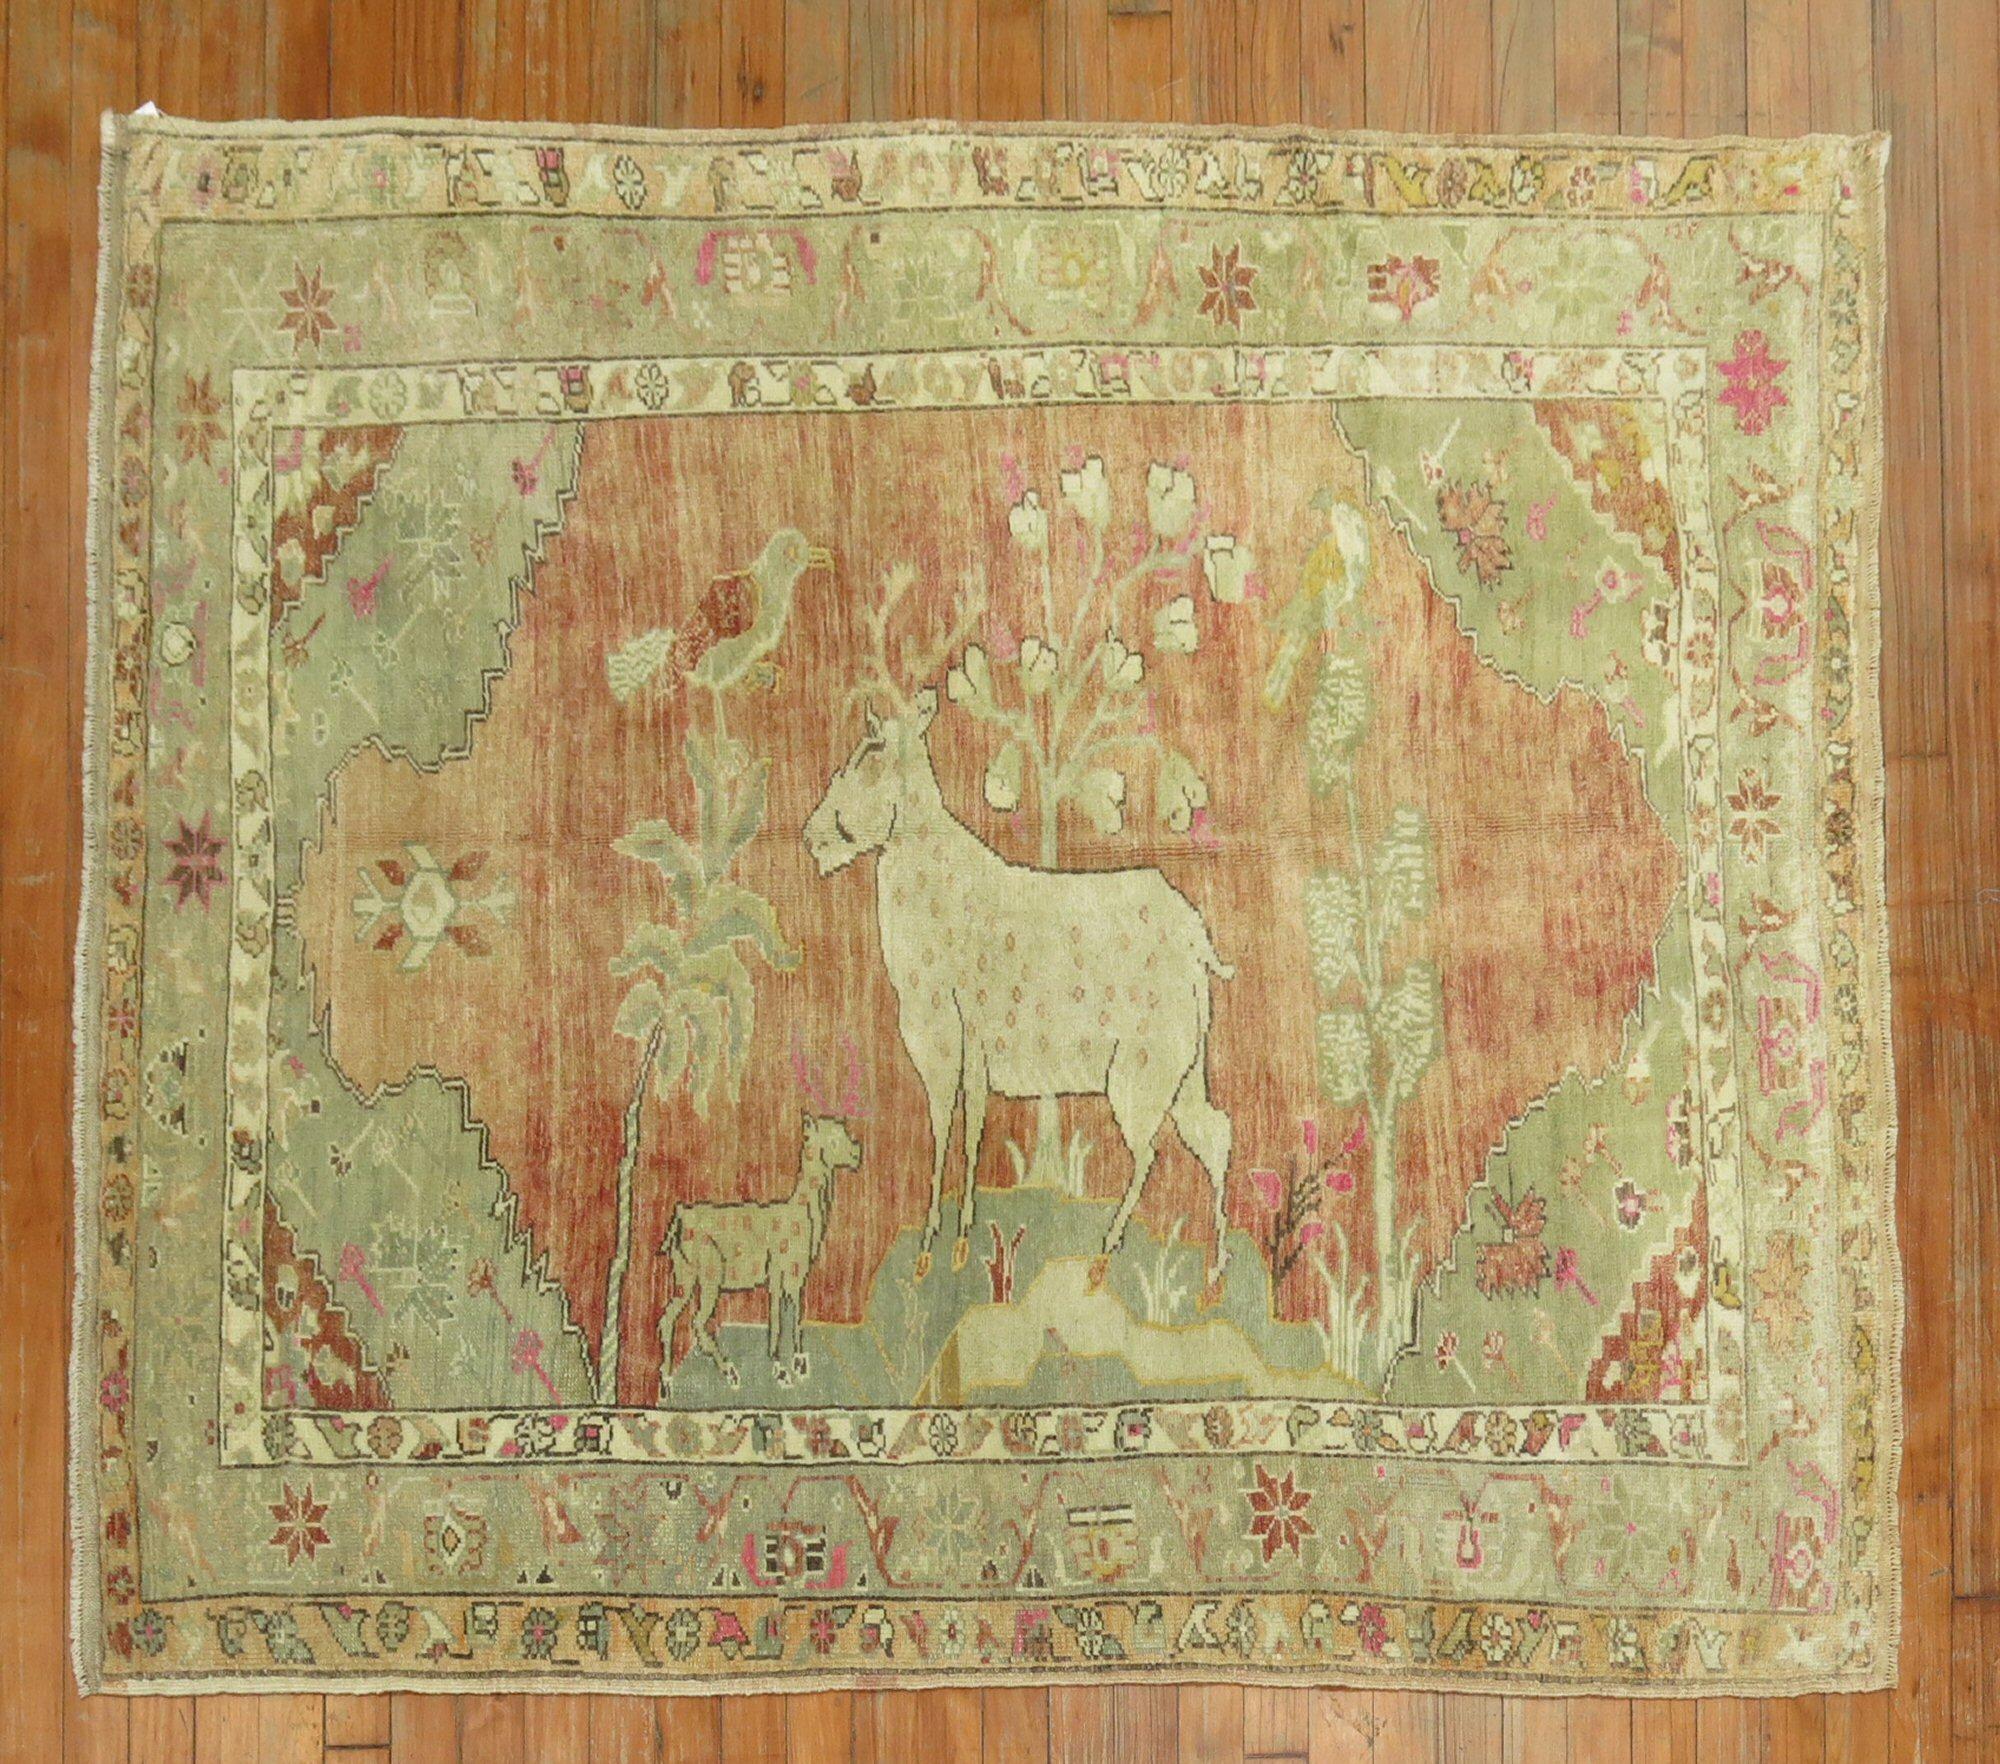 Hand-Woven Pictorial Turkish Deer Pictorial Animal Rug For Sale